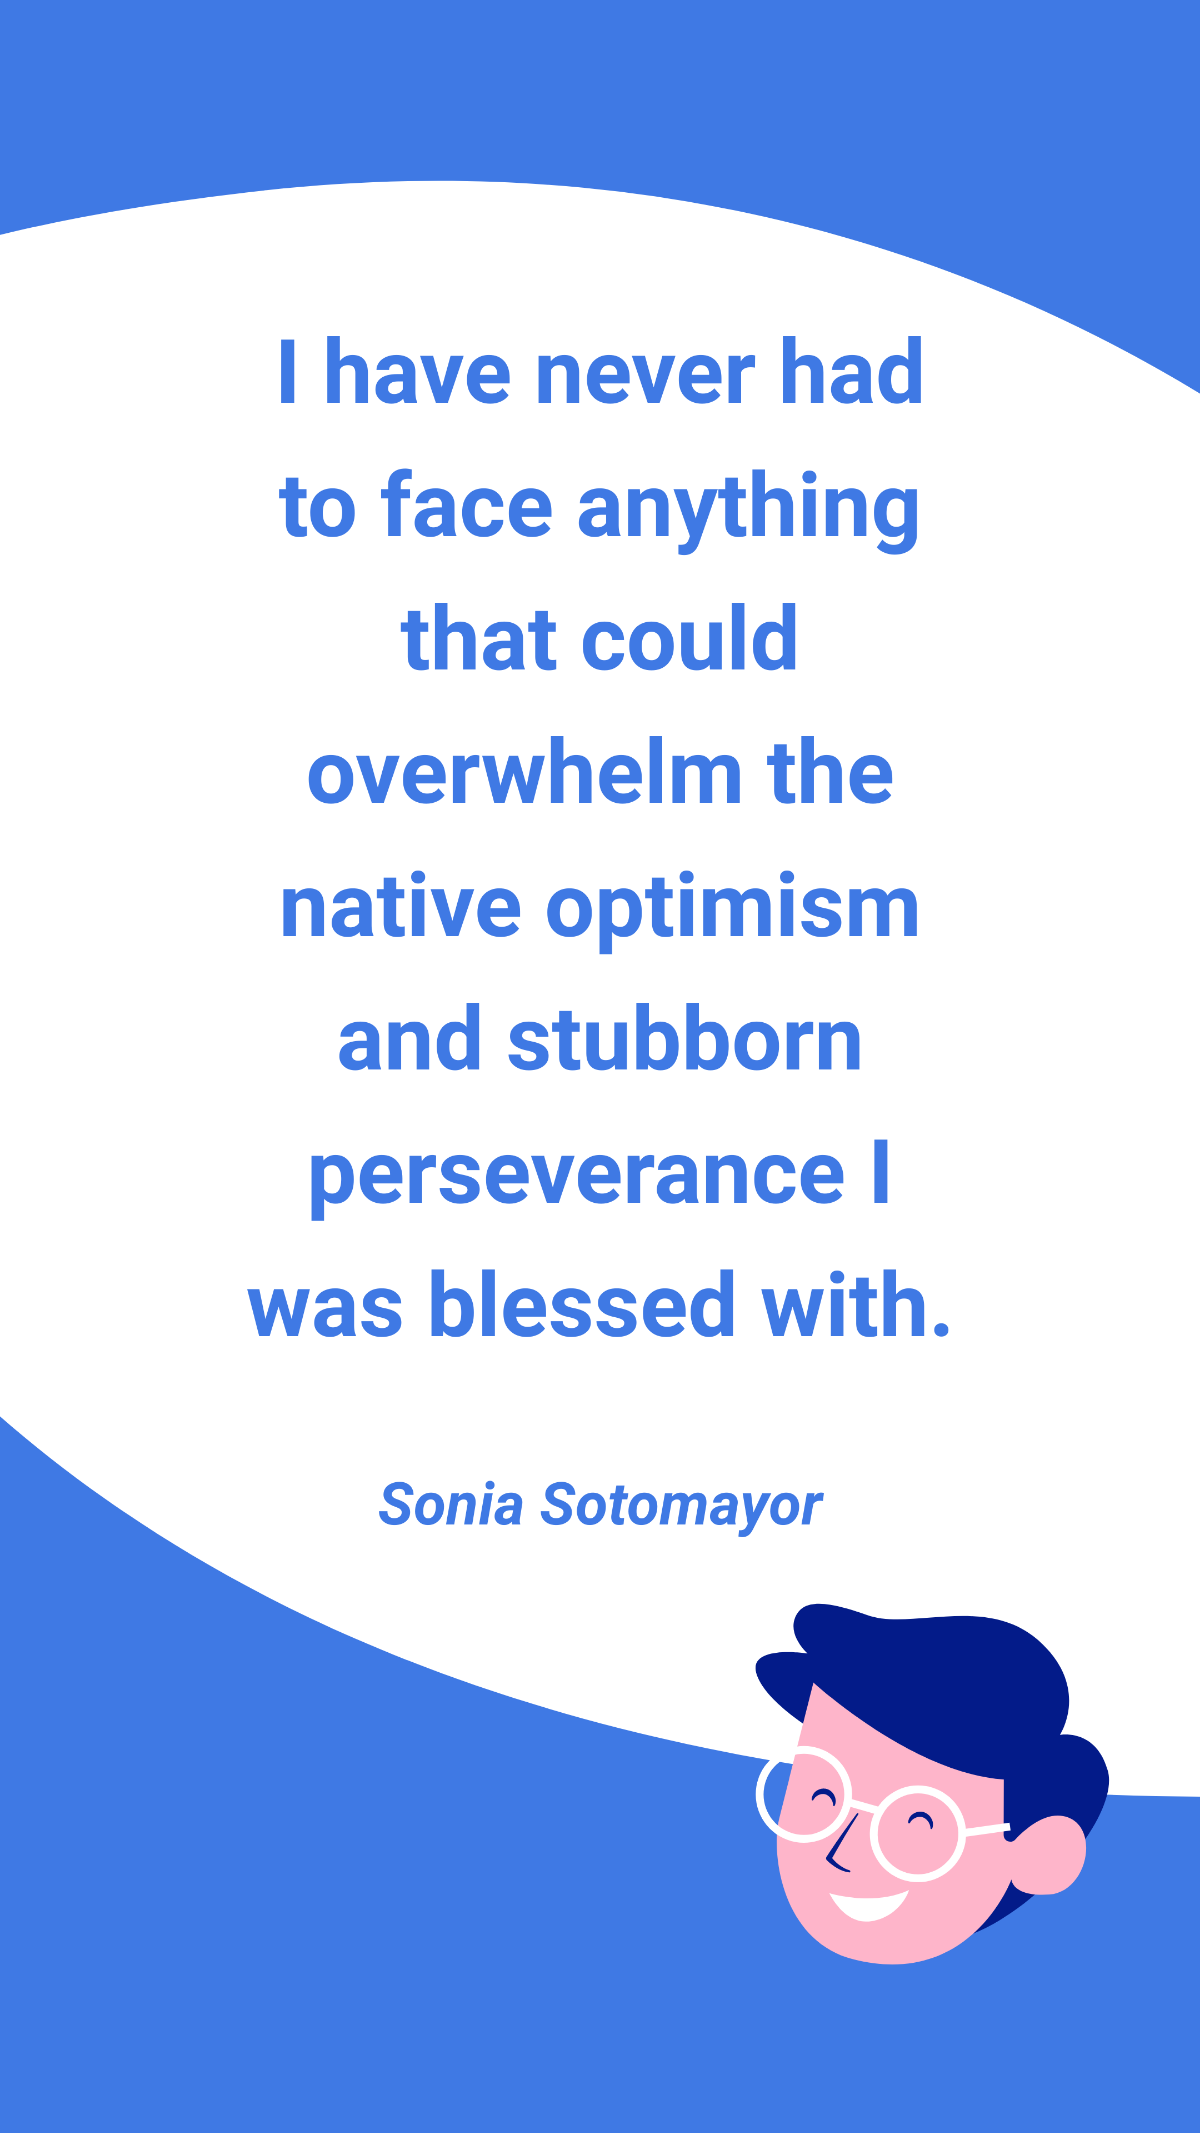 Sonia Sotomayor - I have never had to face anything that could overwhelm the native optimism and stubborn perseverance I was blessed with. Template